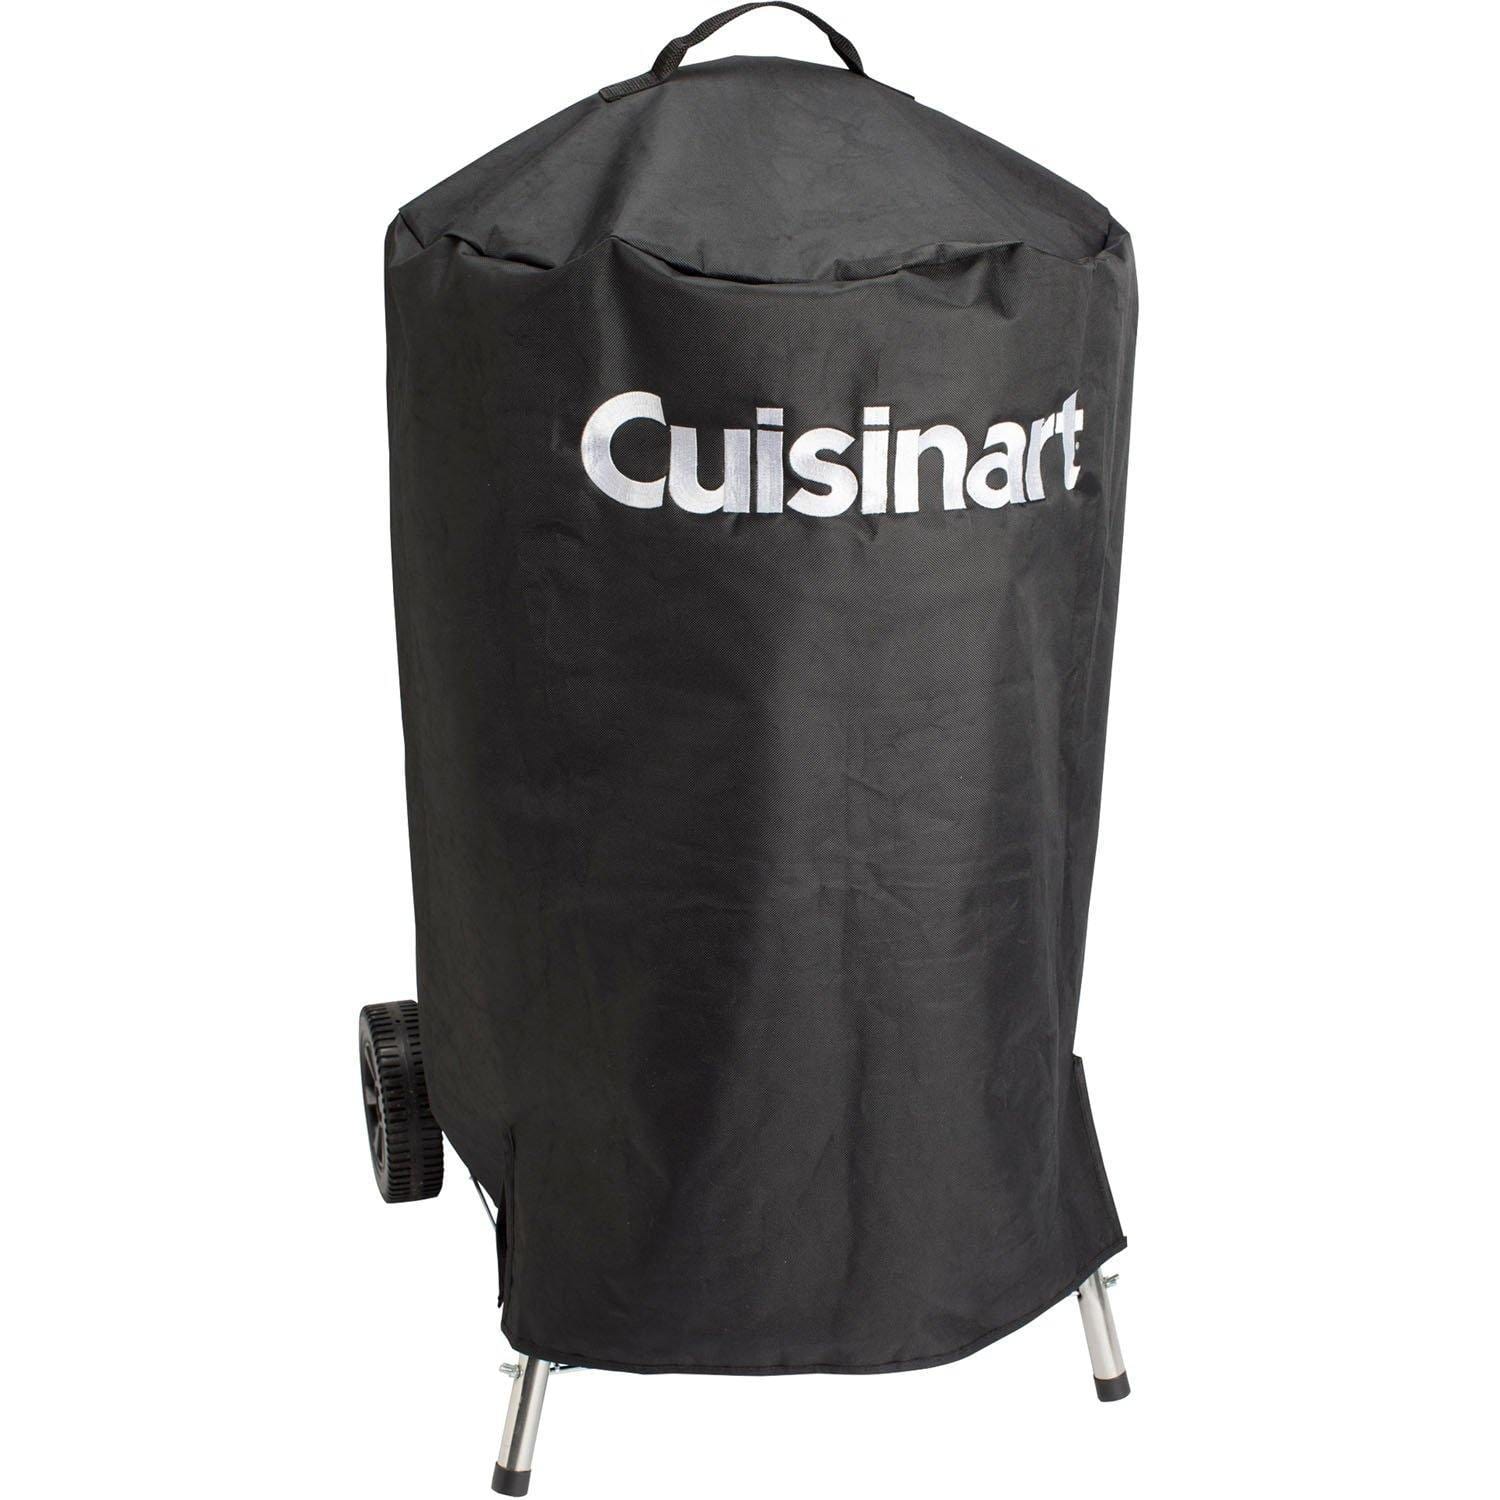 Cuisinart Cuisinart 18-In. Universal Cover for Kettle Grills